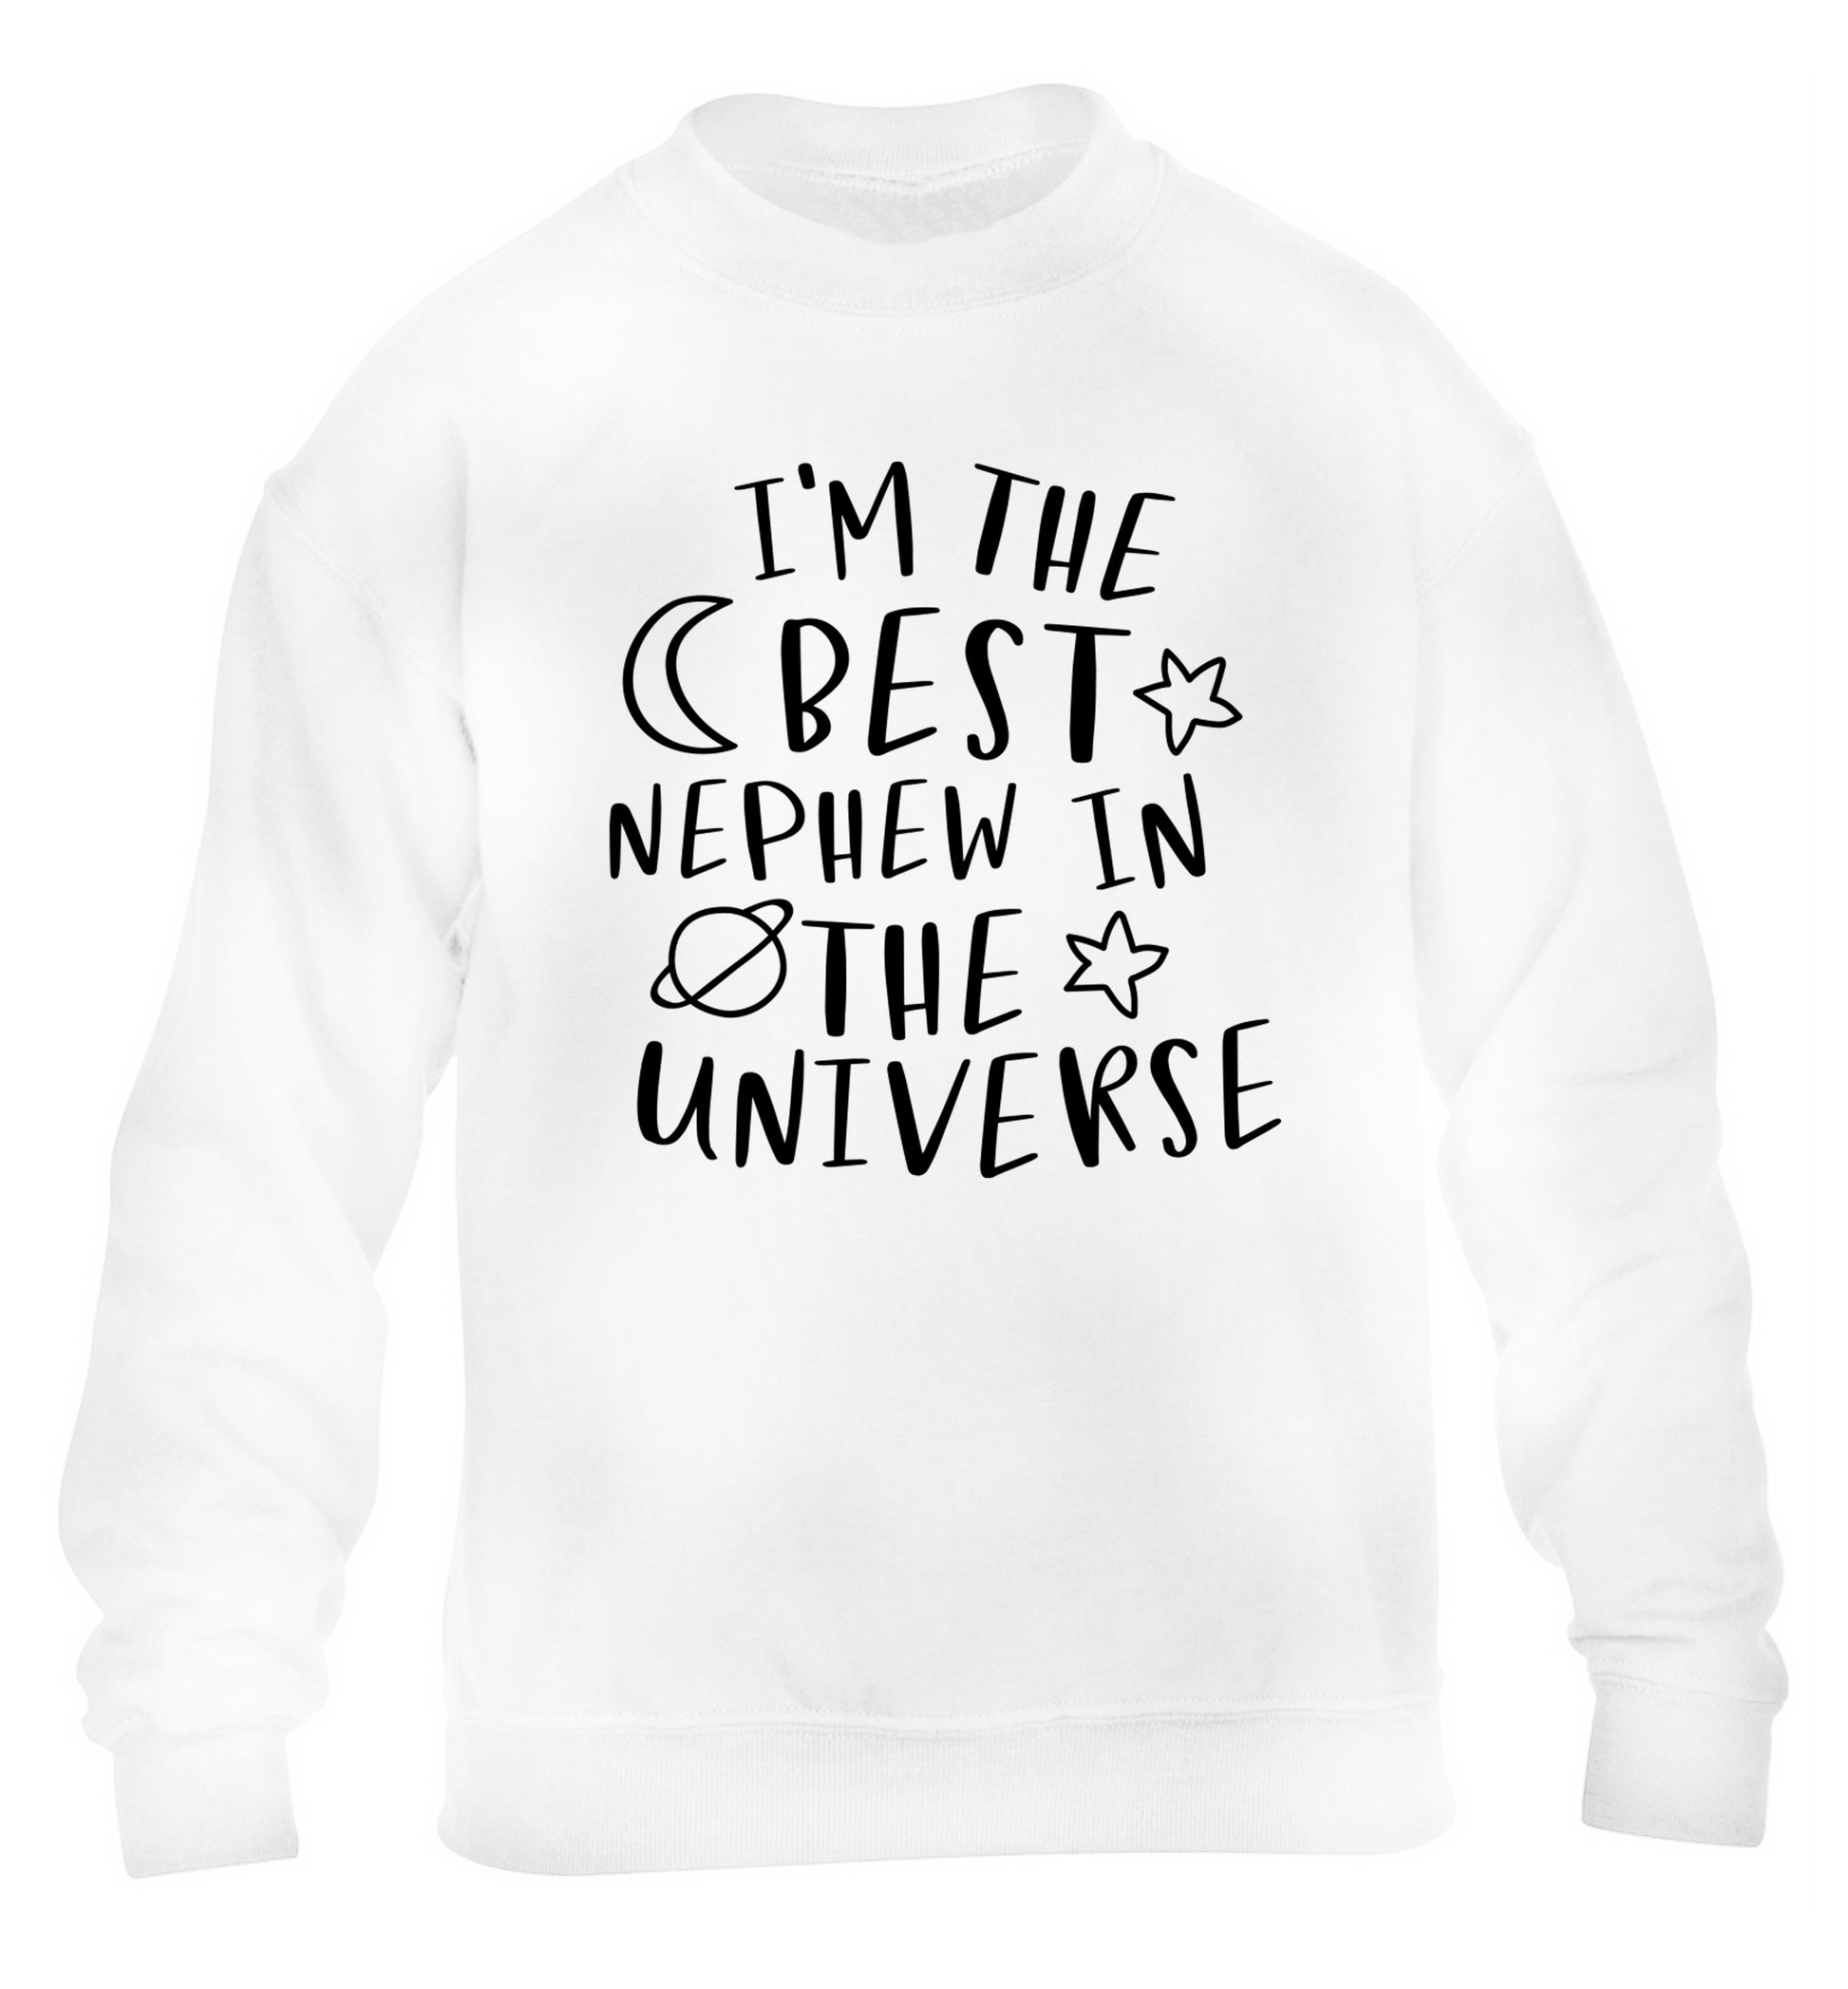 I'm the best nephew in the universe children's white sweater 12-13 Years